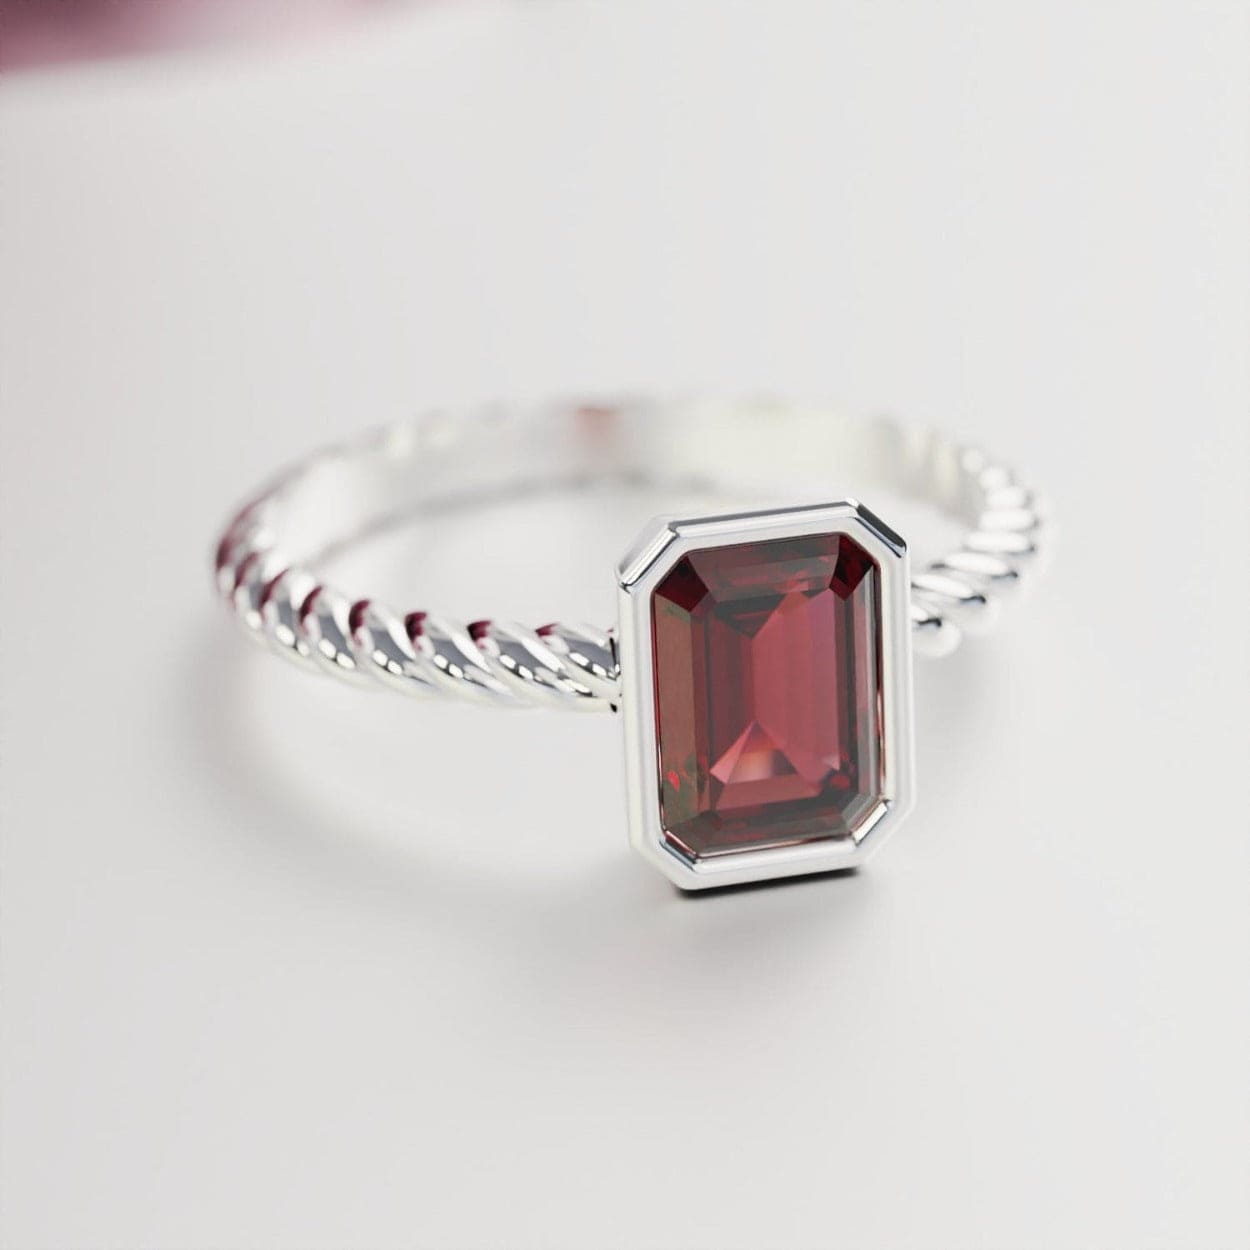 The Solitaire: Emerald-Cut Garnet Ring - S925 Sterling Silver